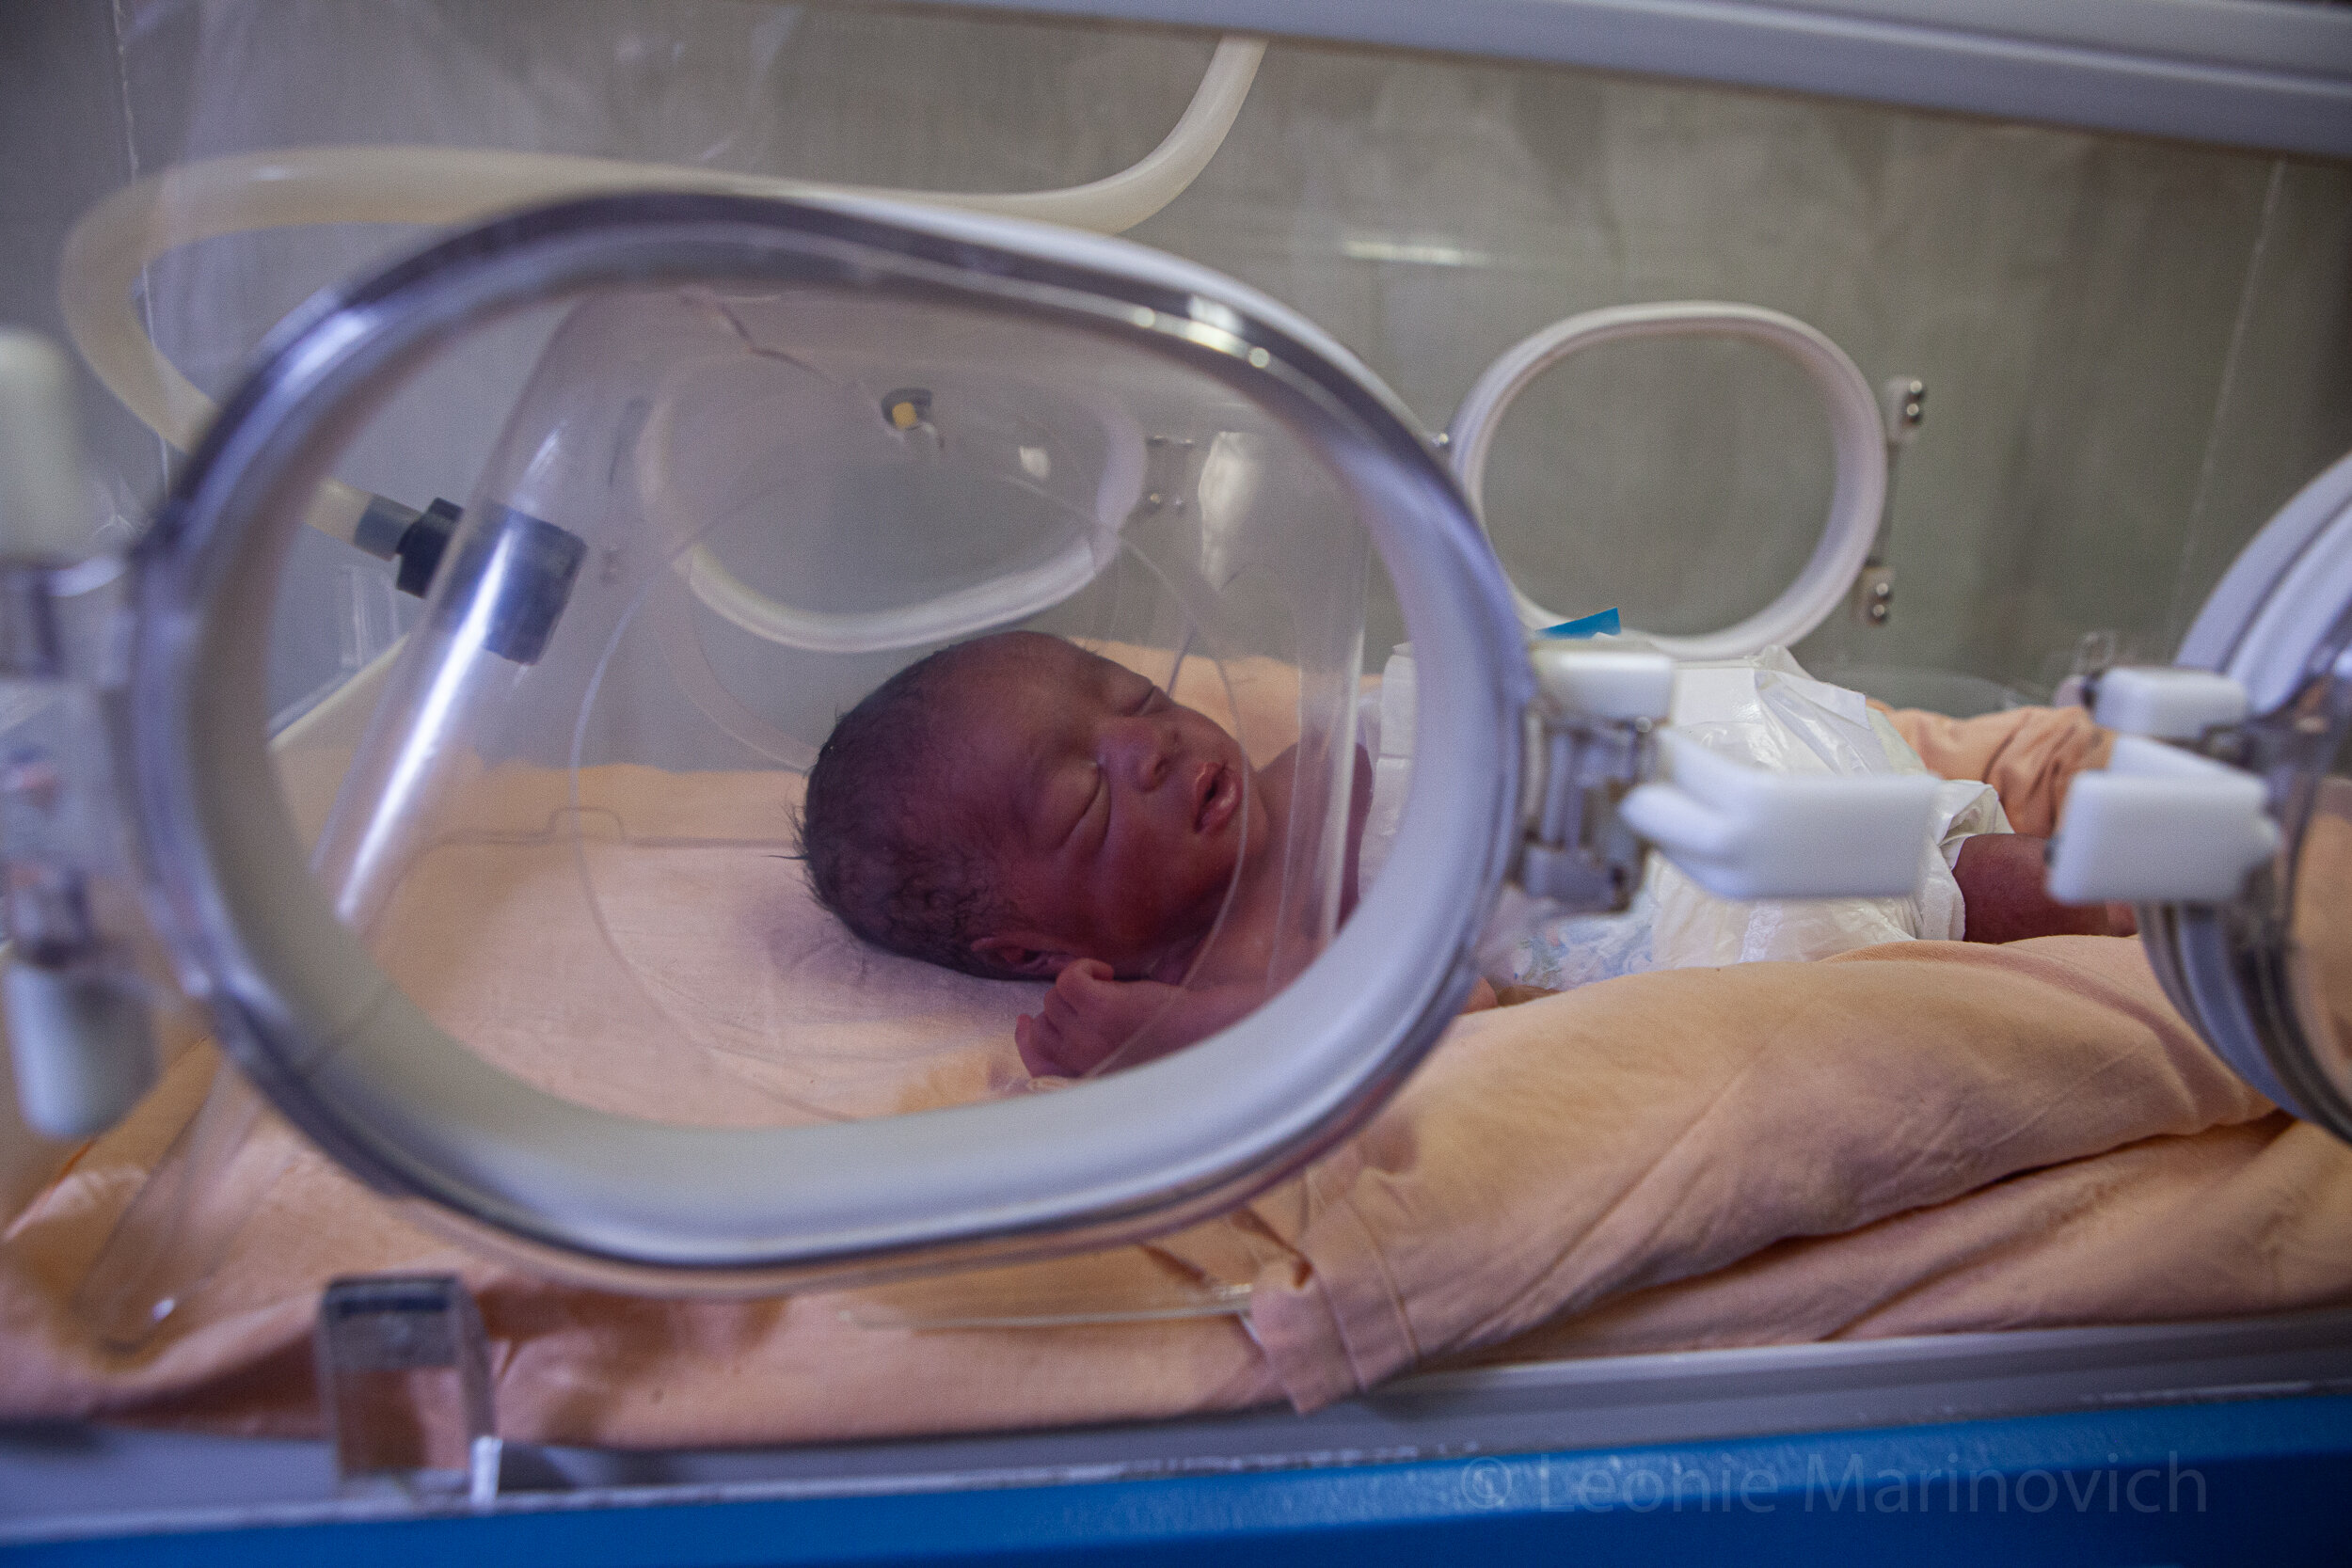  16 March 2011. Malamulela, Limpopo, South Africa. Every year about 23,000 newborn babies die in South Africa (UNICEF data from 2010), but the majority of these deaths are easily preventable if hospitals improve the quality of their neonatal care. 